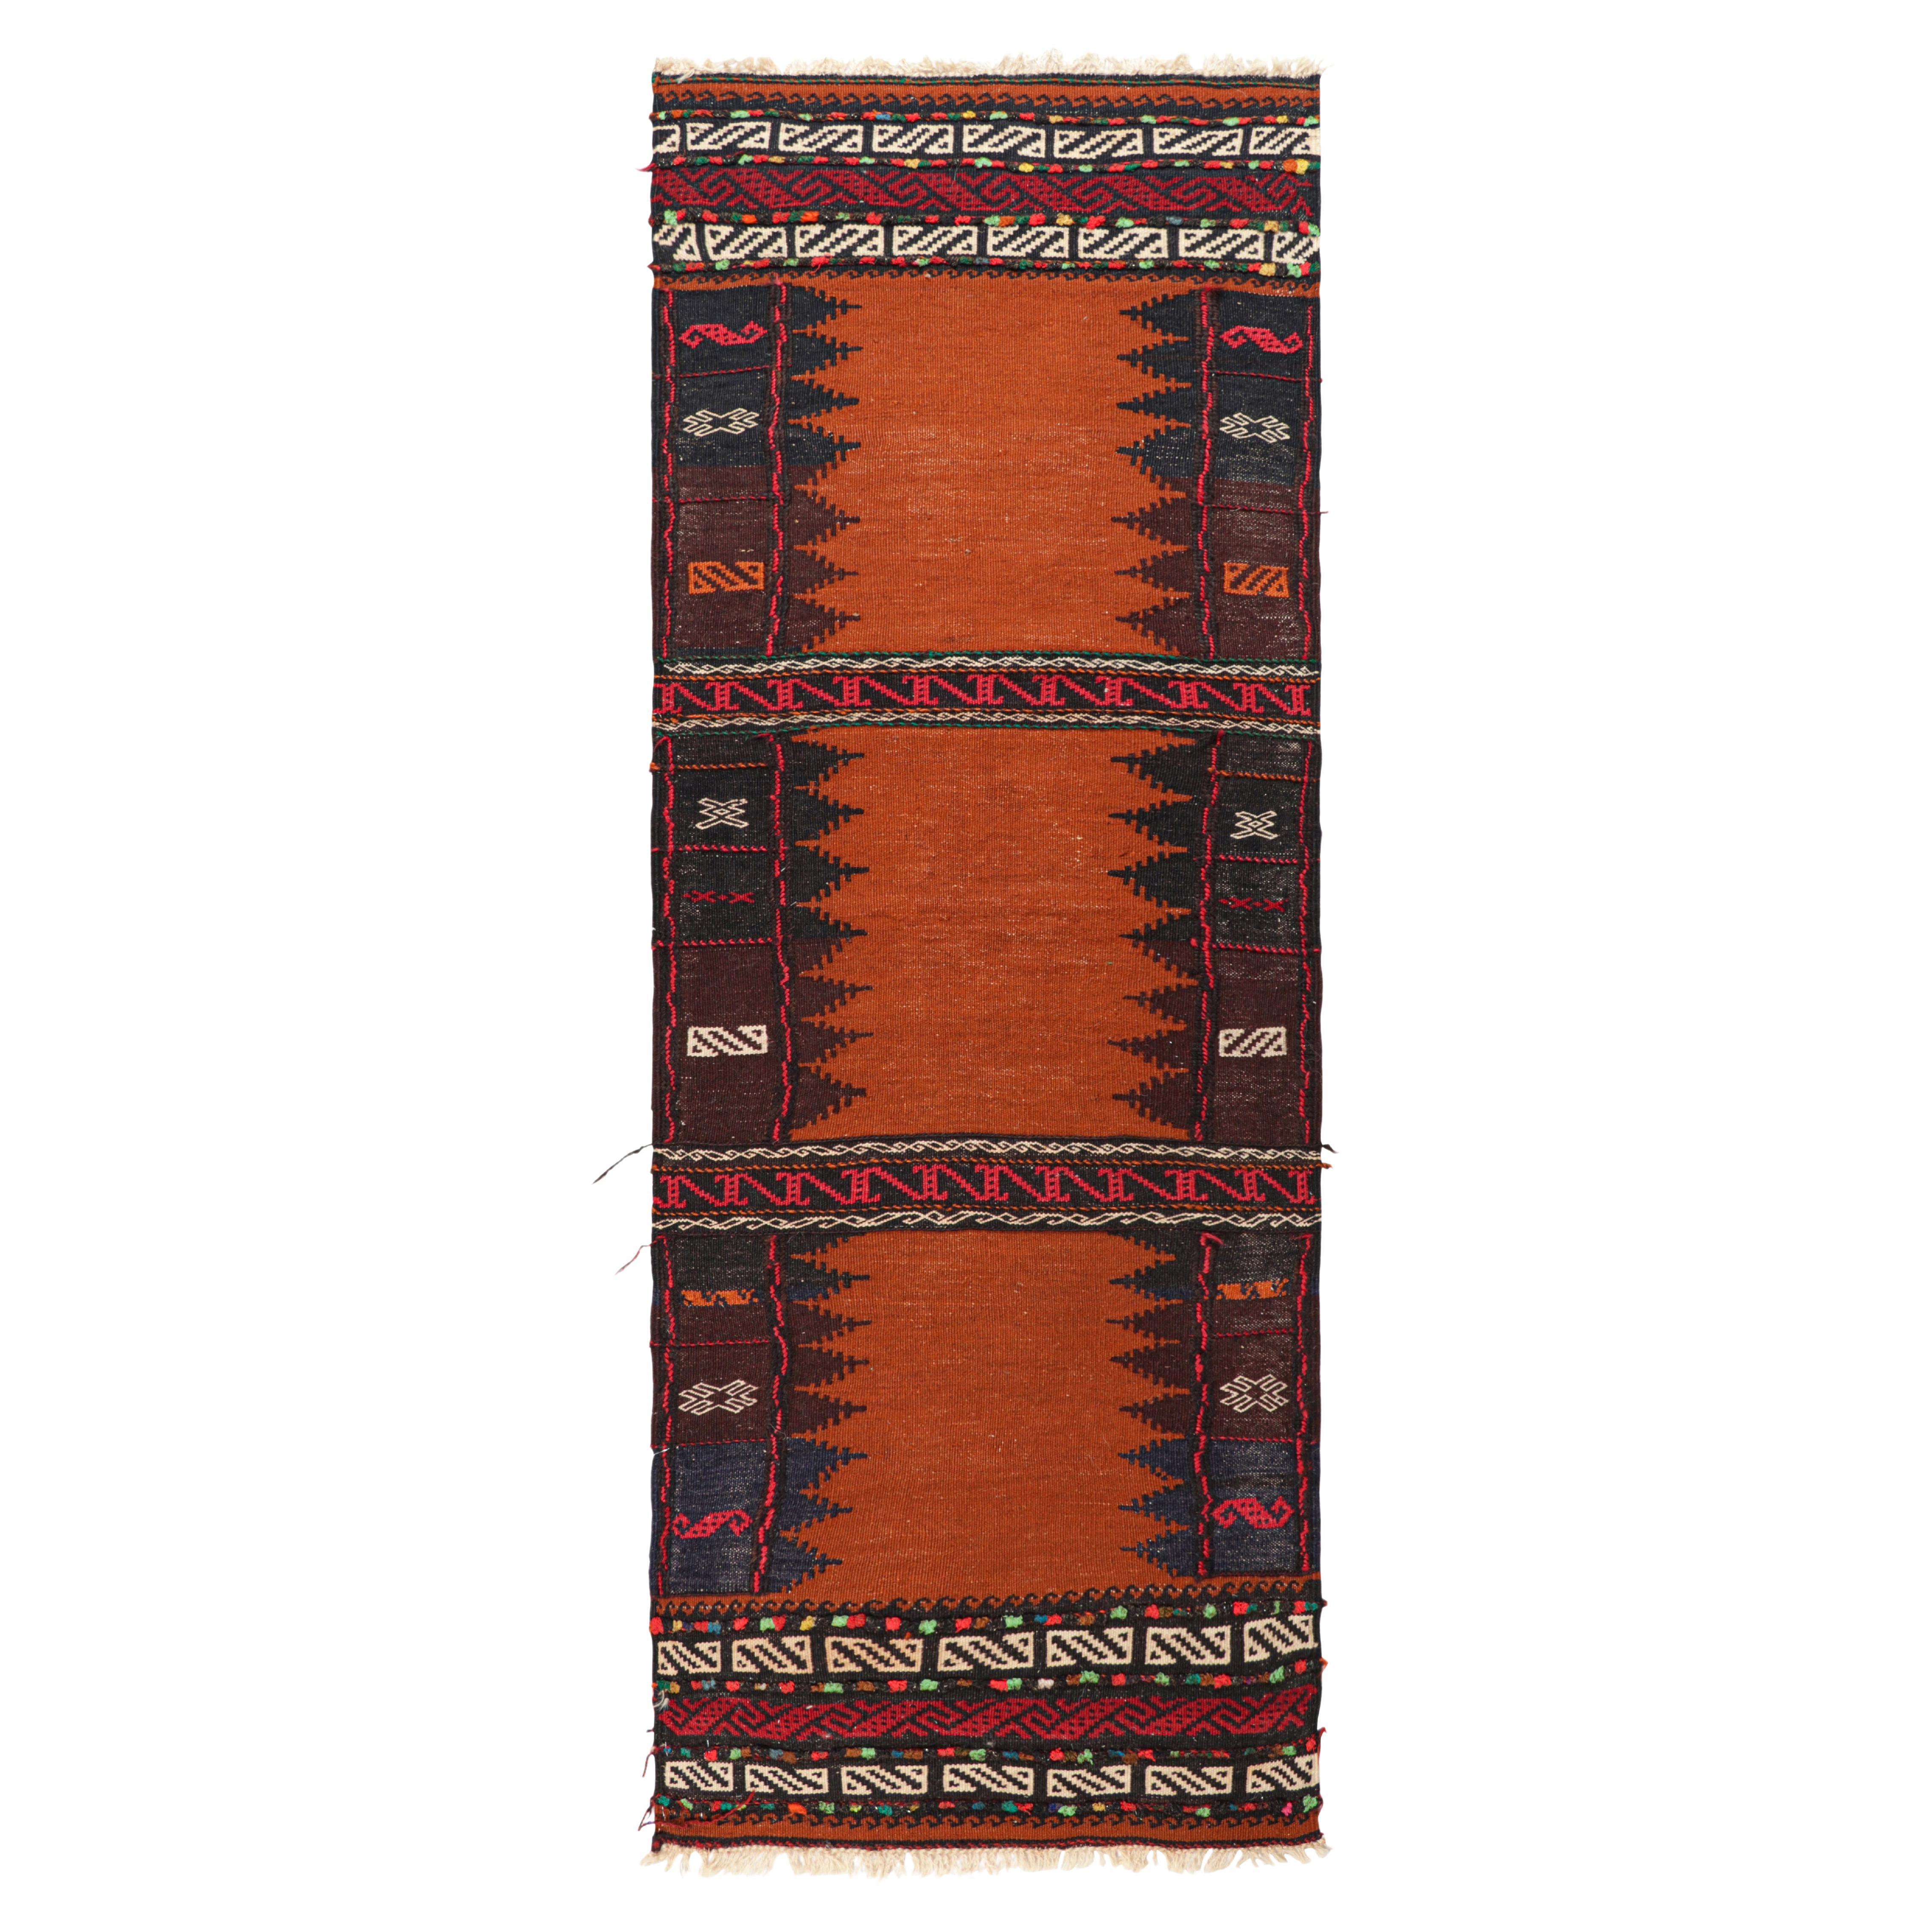 Vintage Afghan Kilim in Rust with Geometric Patterns, from Rug & Kilim For Sale